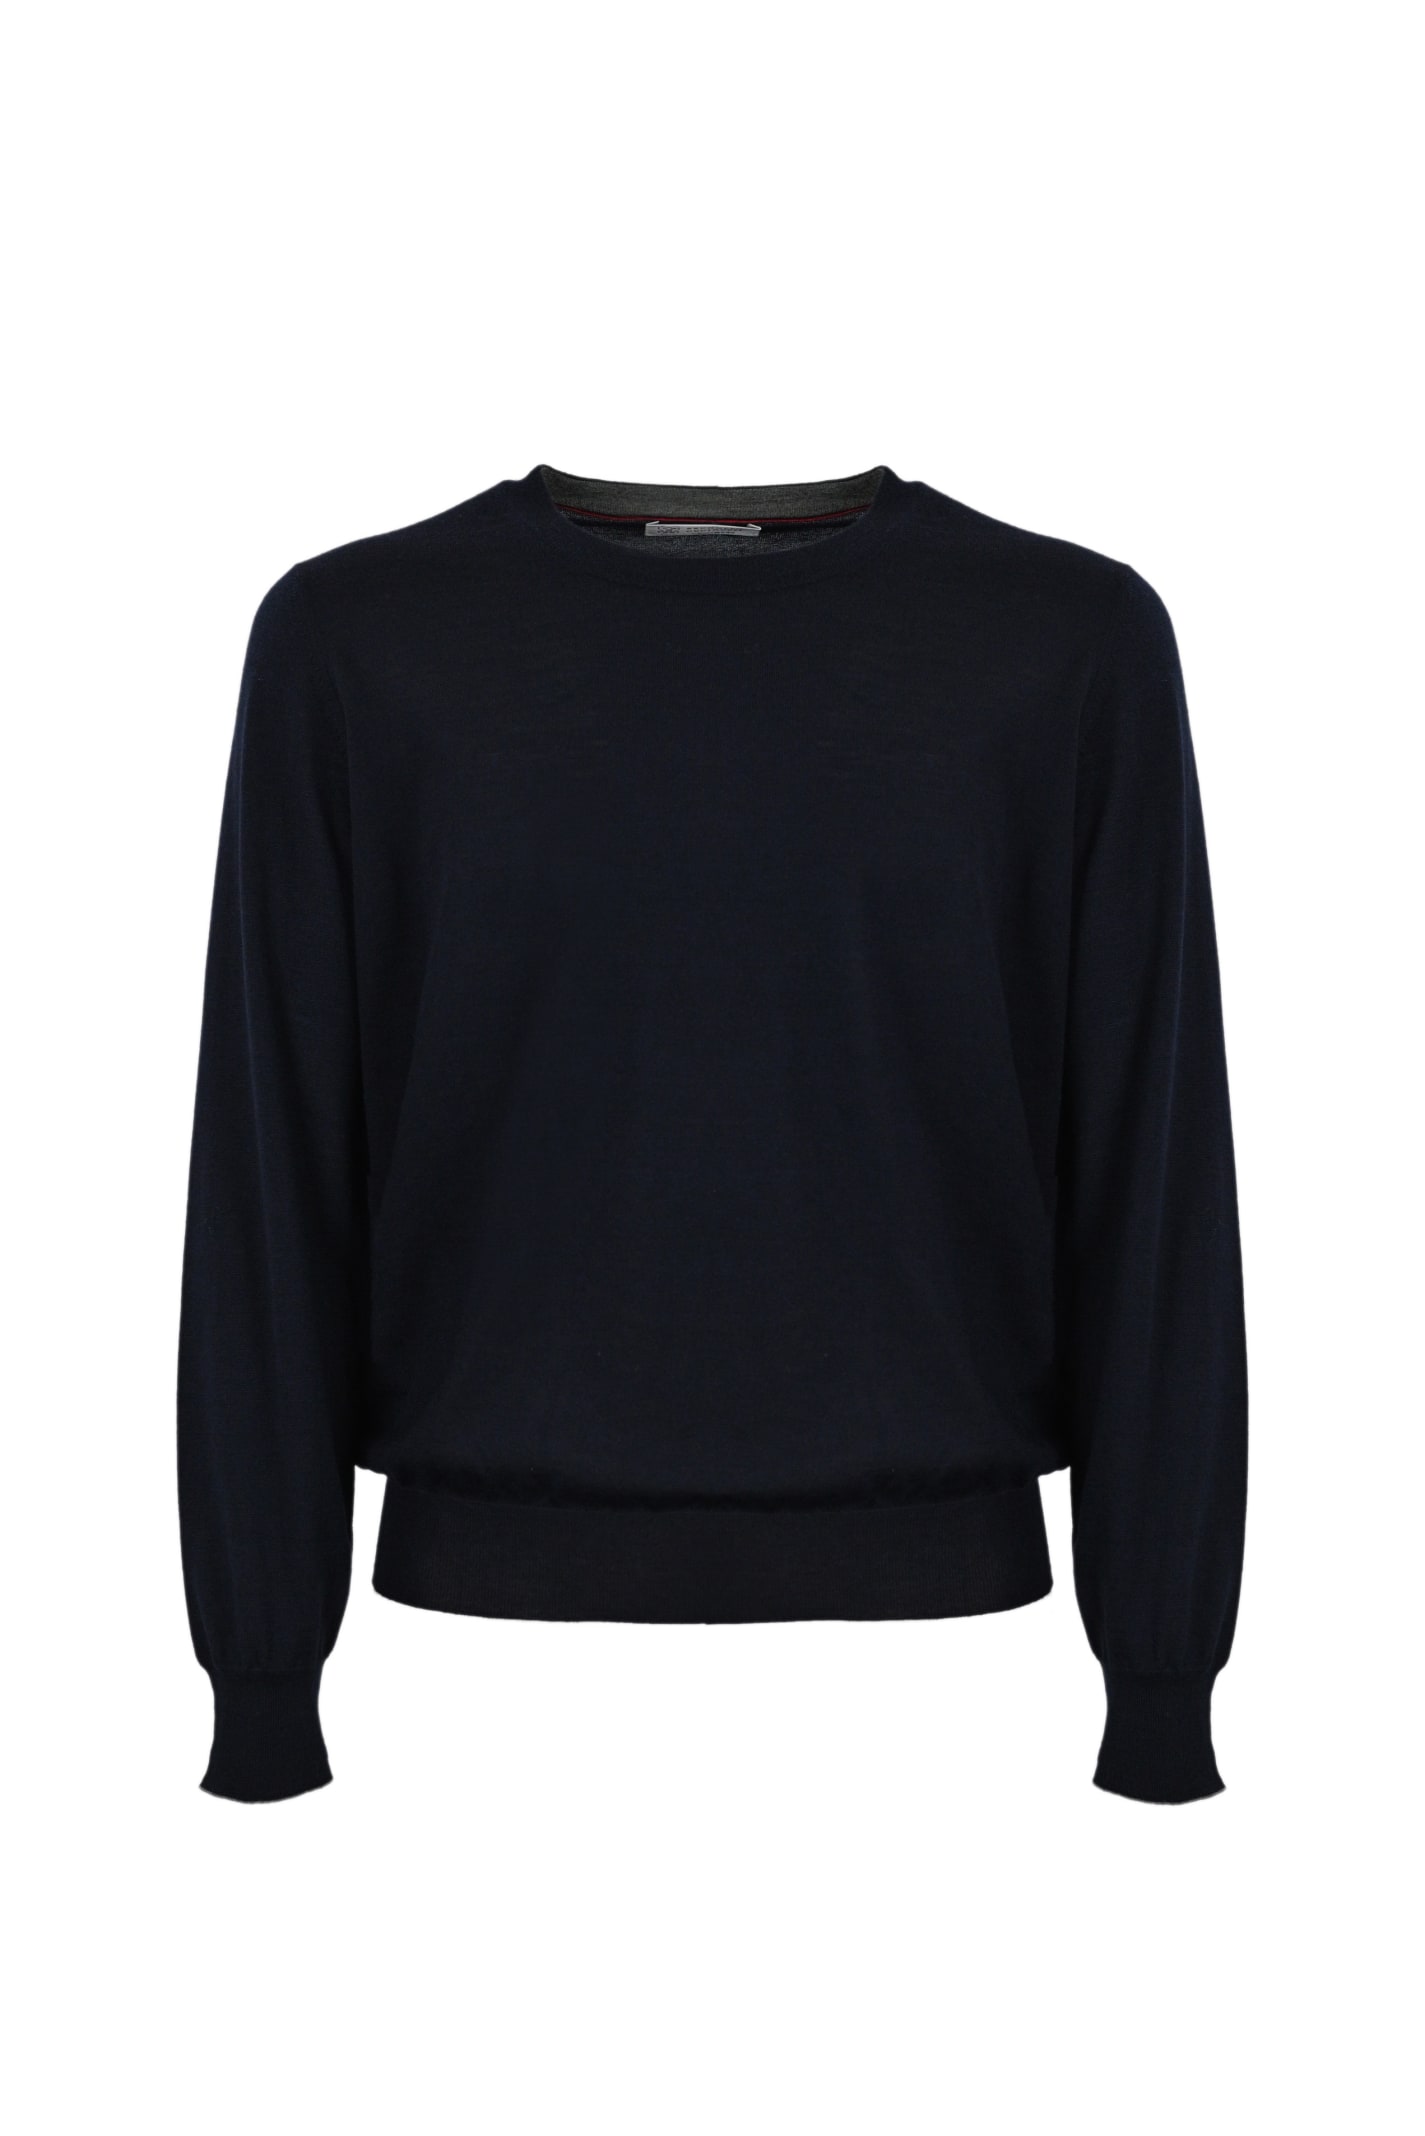 BRUNELLO CUCINELLI WOOL AND CASHMERE BLEND SWEATER